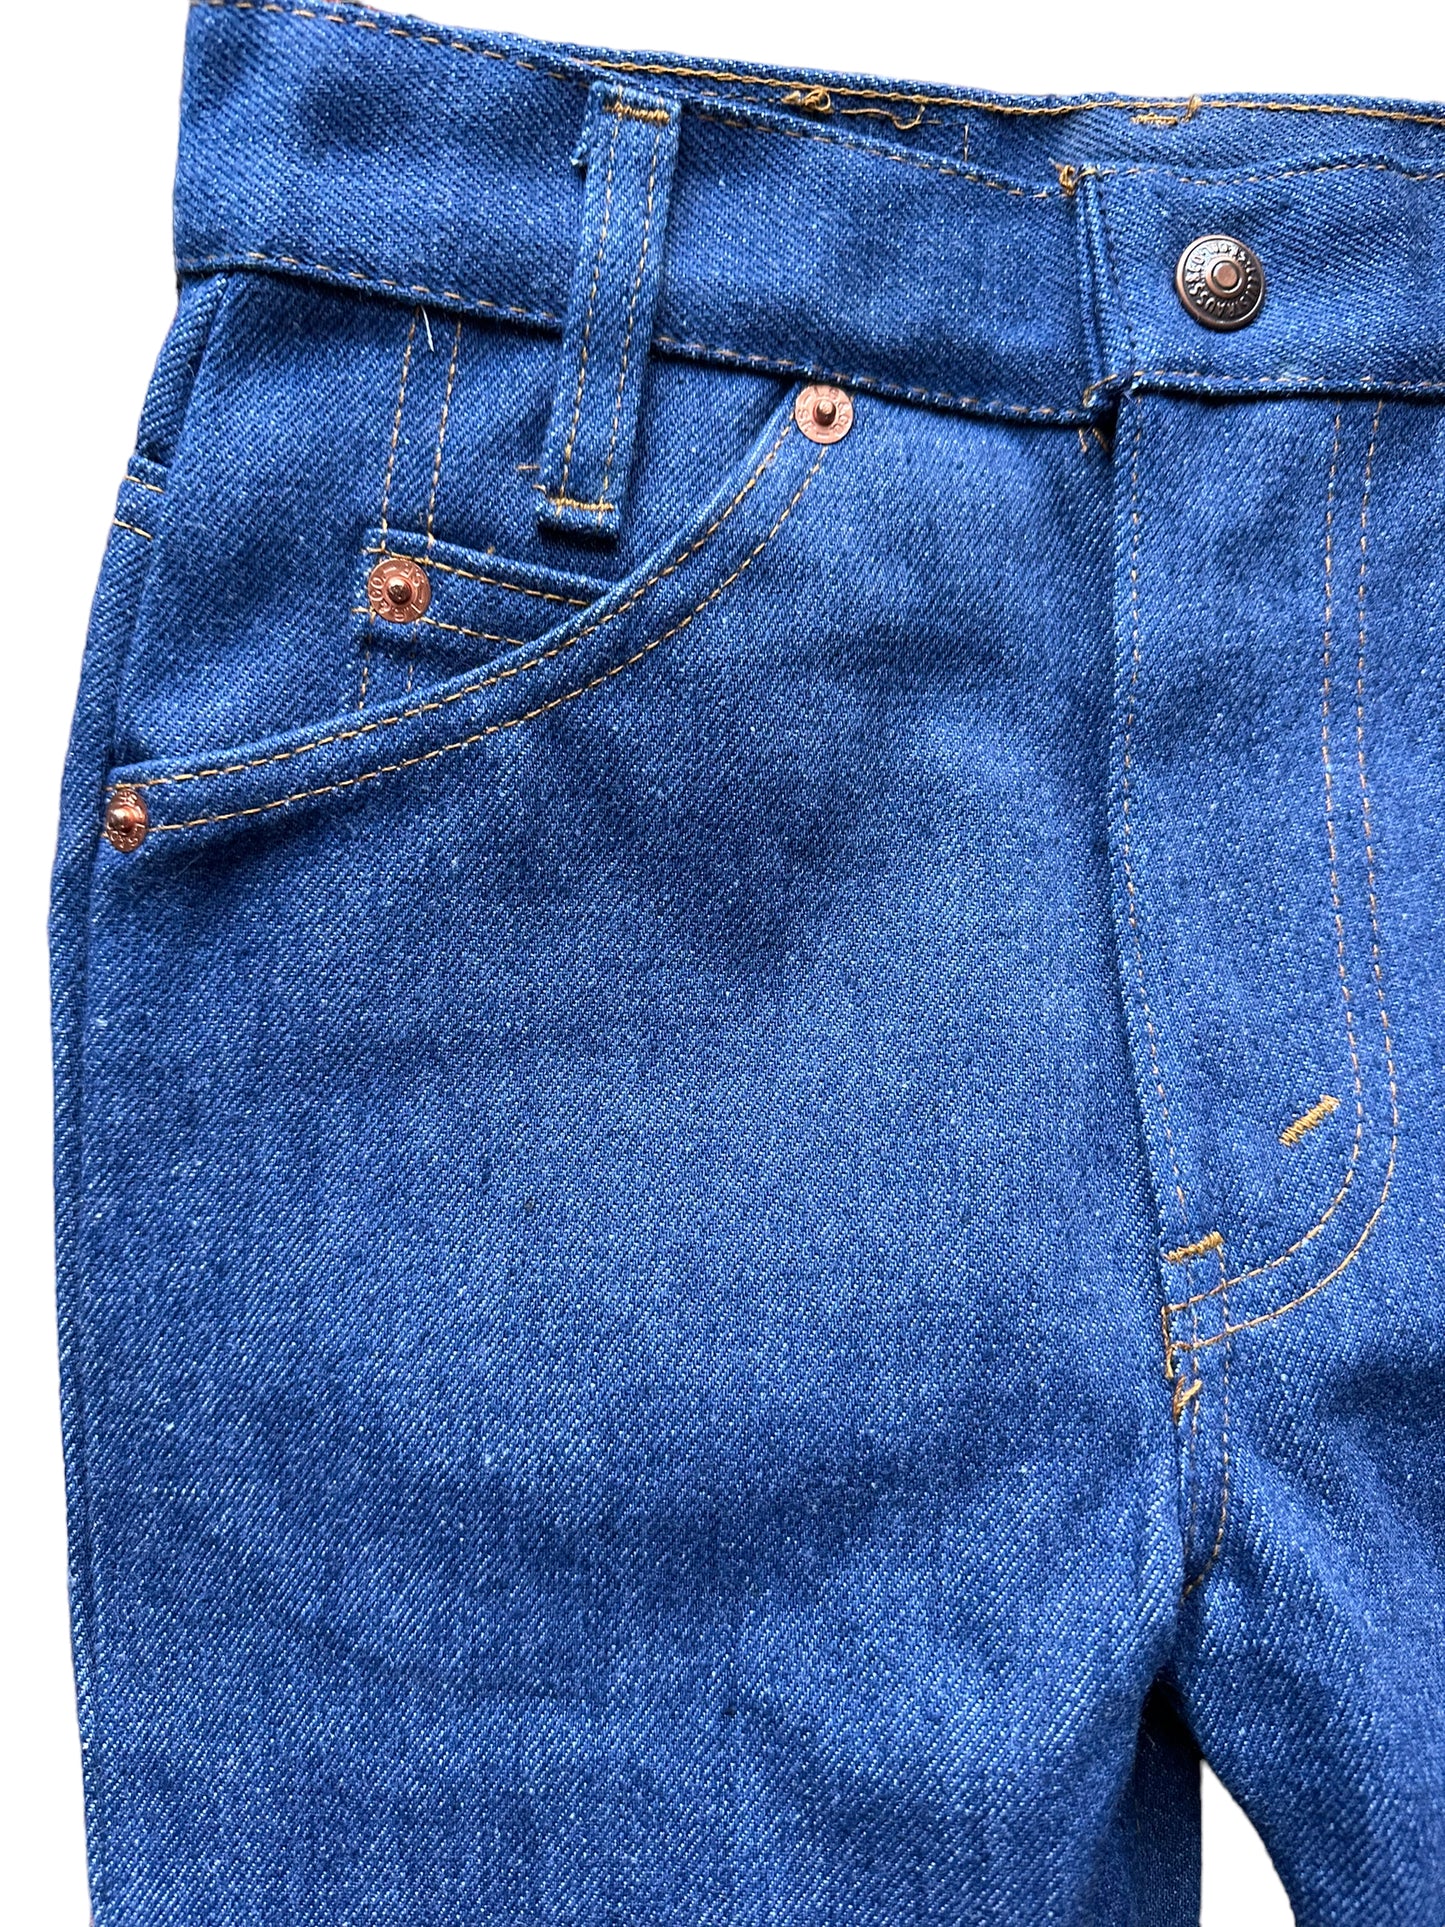 Front right pocket view of Vintage Deadstock Saddleman Boot Cut Jeans 24x23 | Seattle Kid's Vintage | Barn Owl Deadstock Levi's